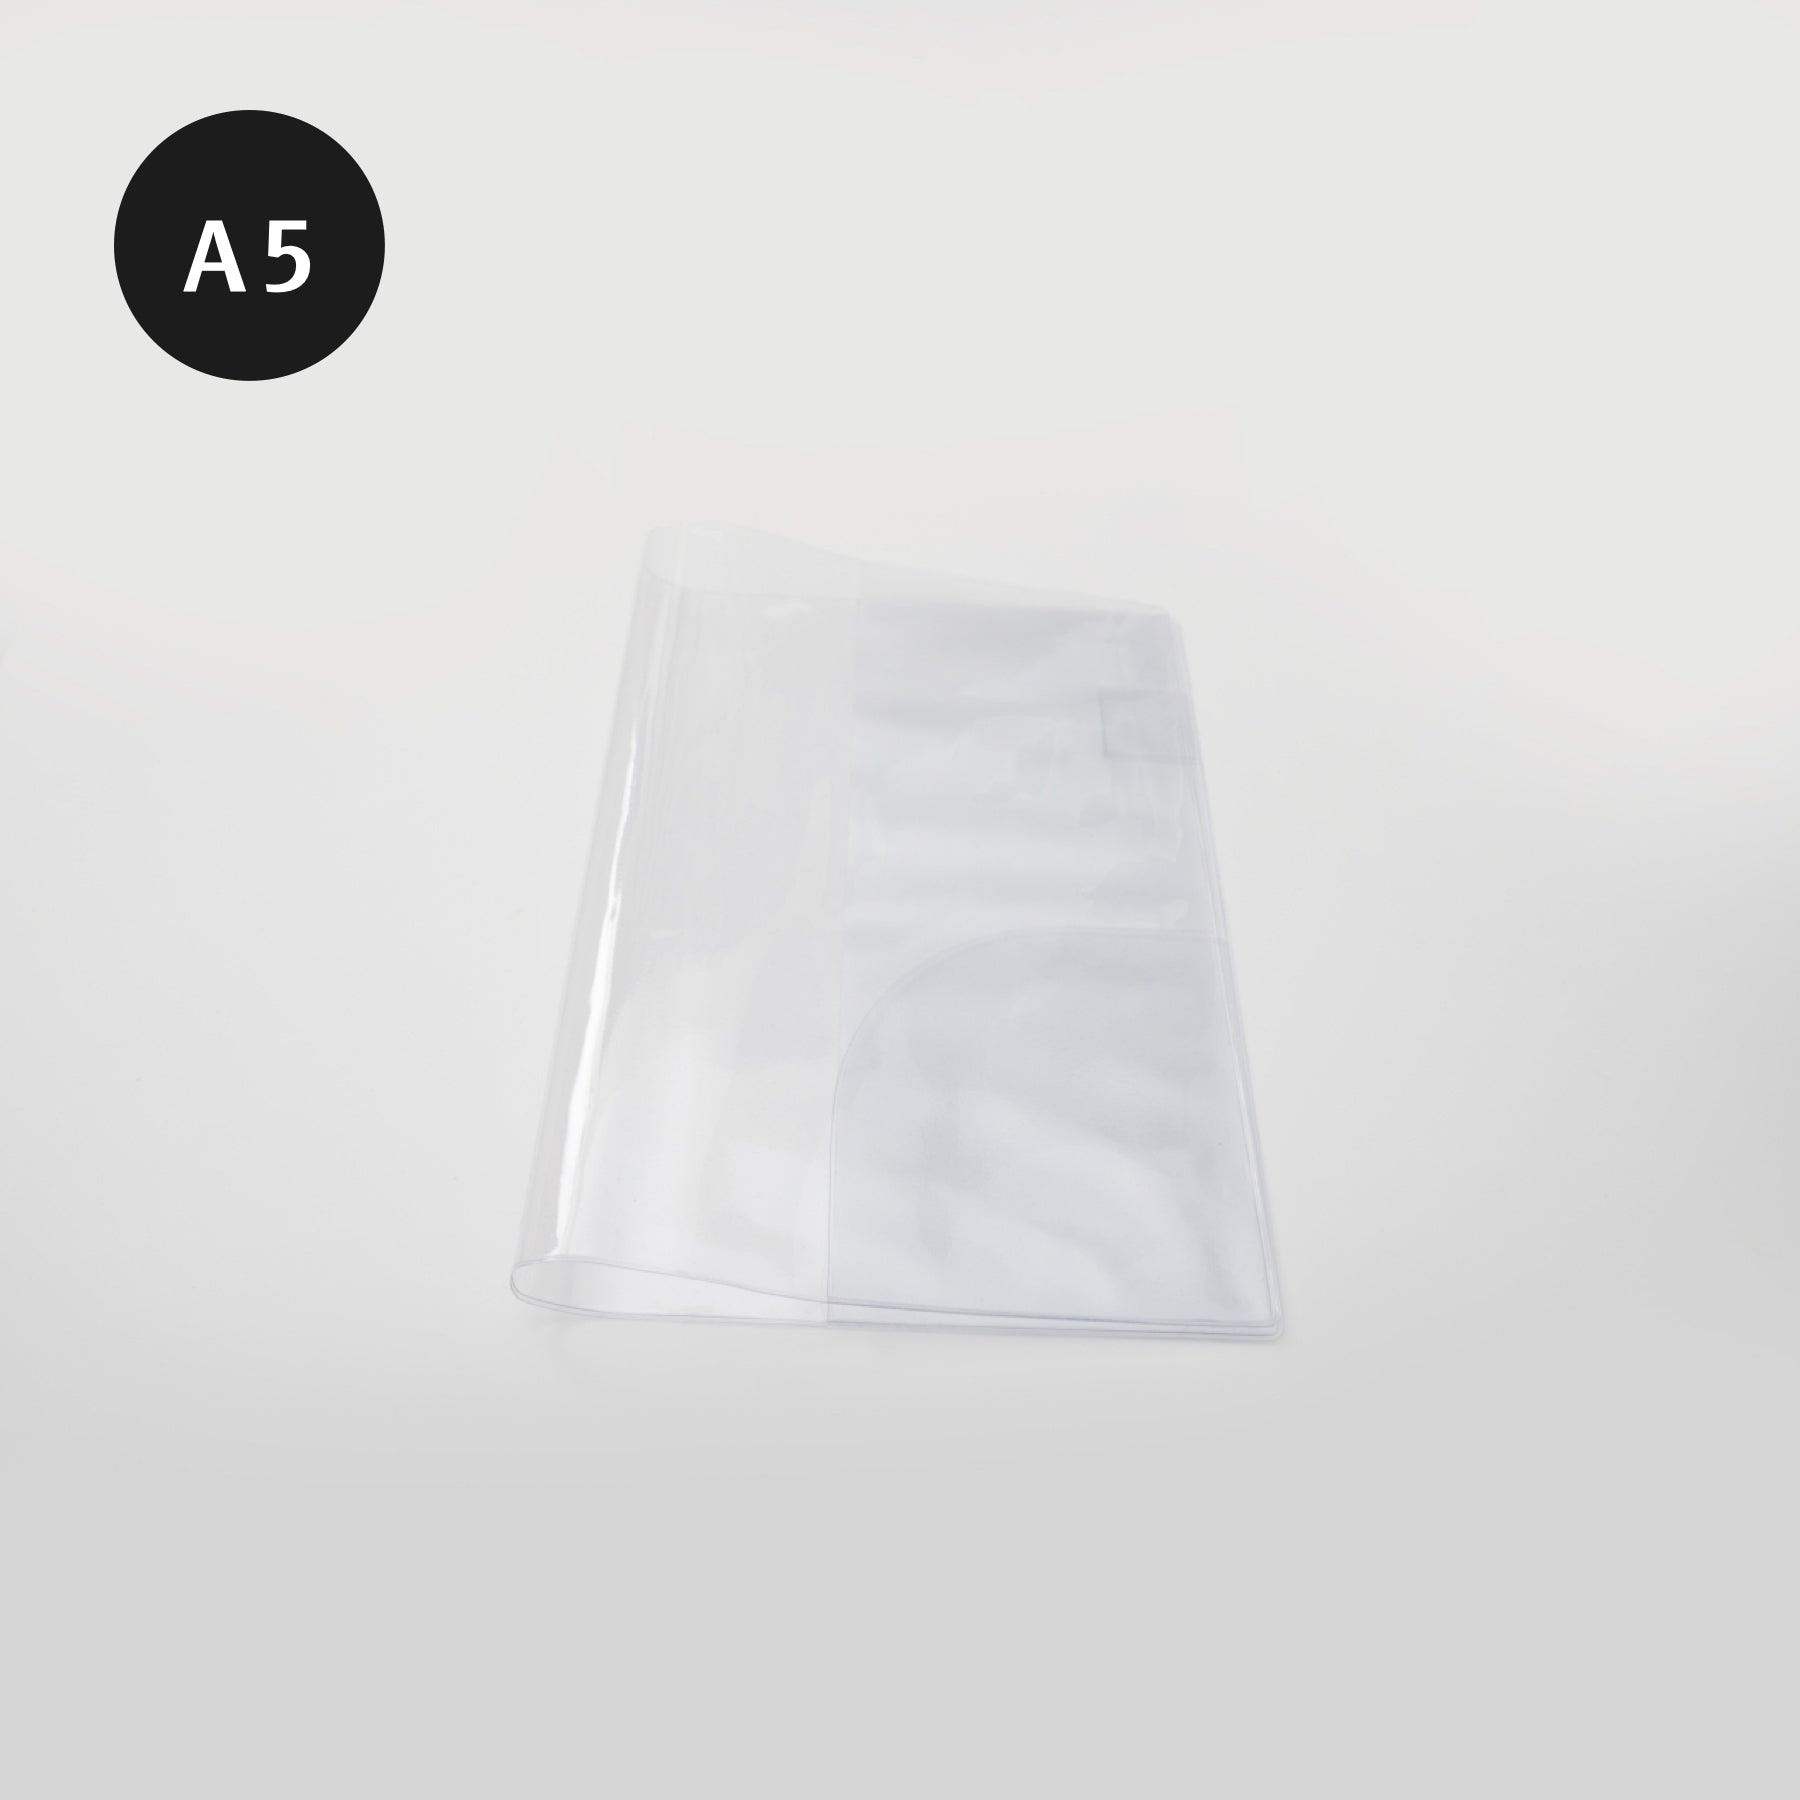 TAKE A NOTE REGULAR PLANNER TRANSPARENT PVC COVER A5